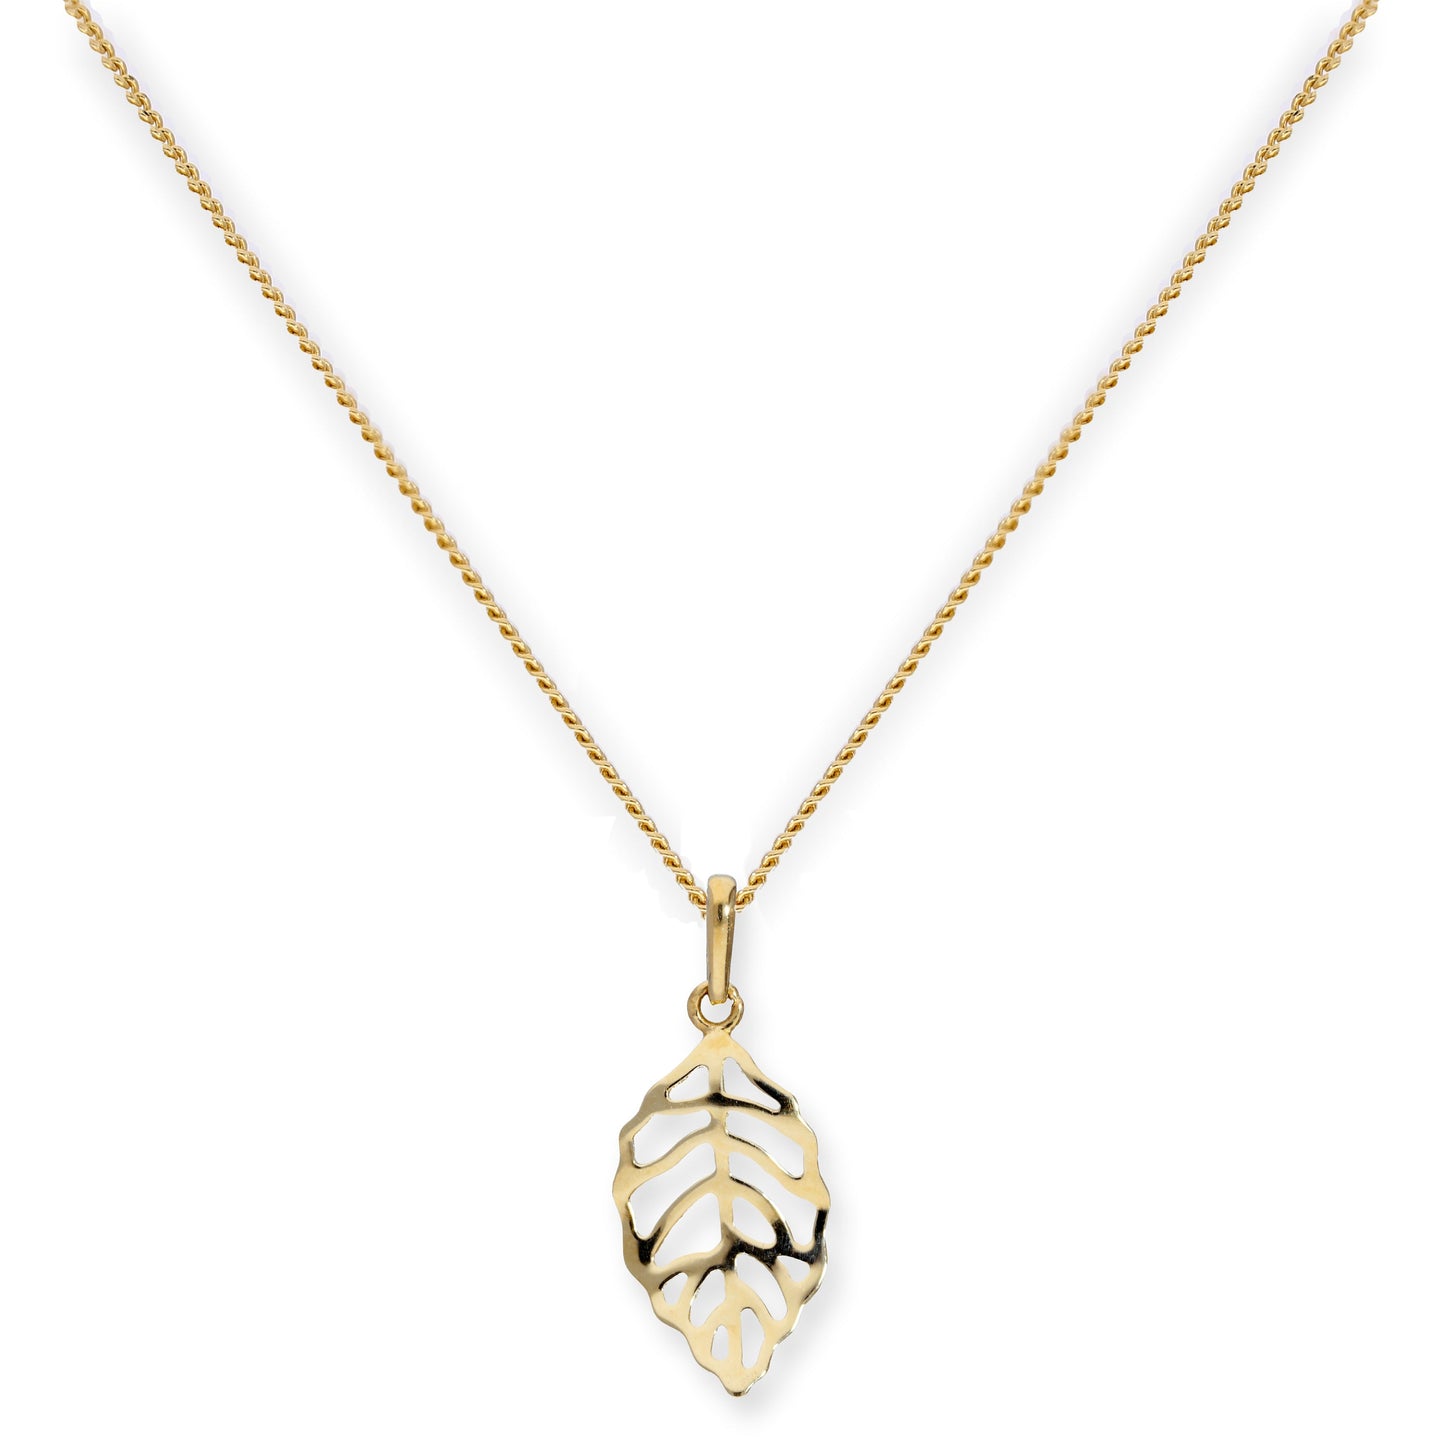 9ct Gold Cut Out Leaf Pendant Necklace 16 - 20 Inches